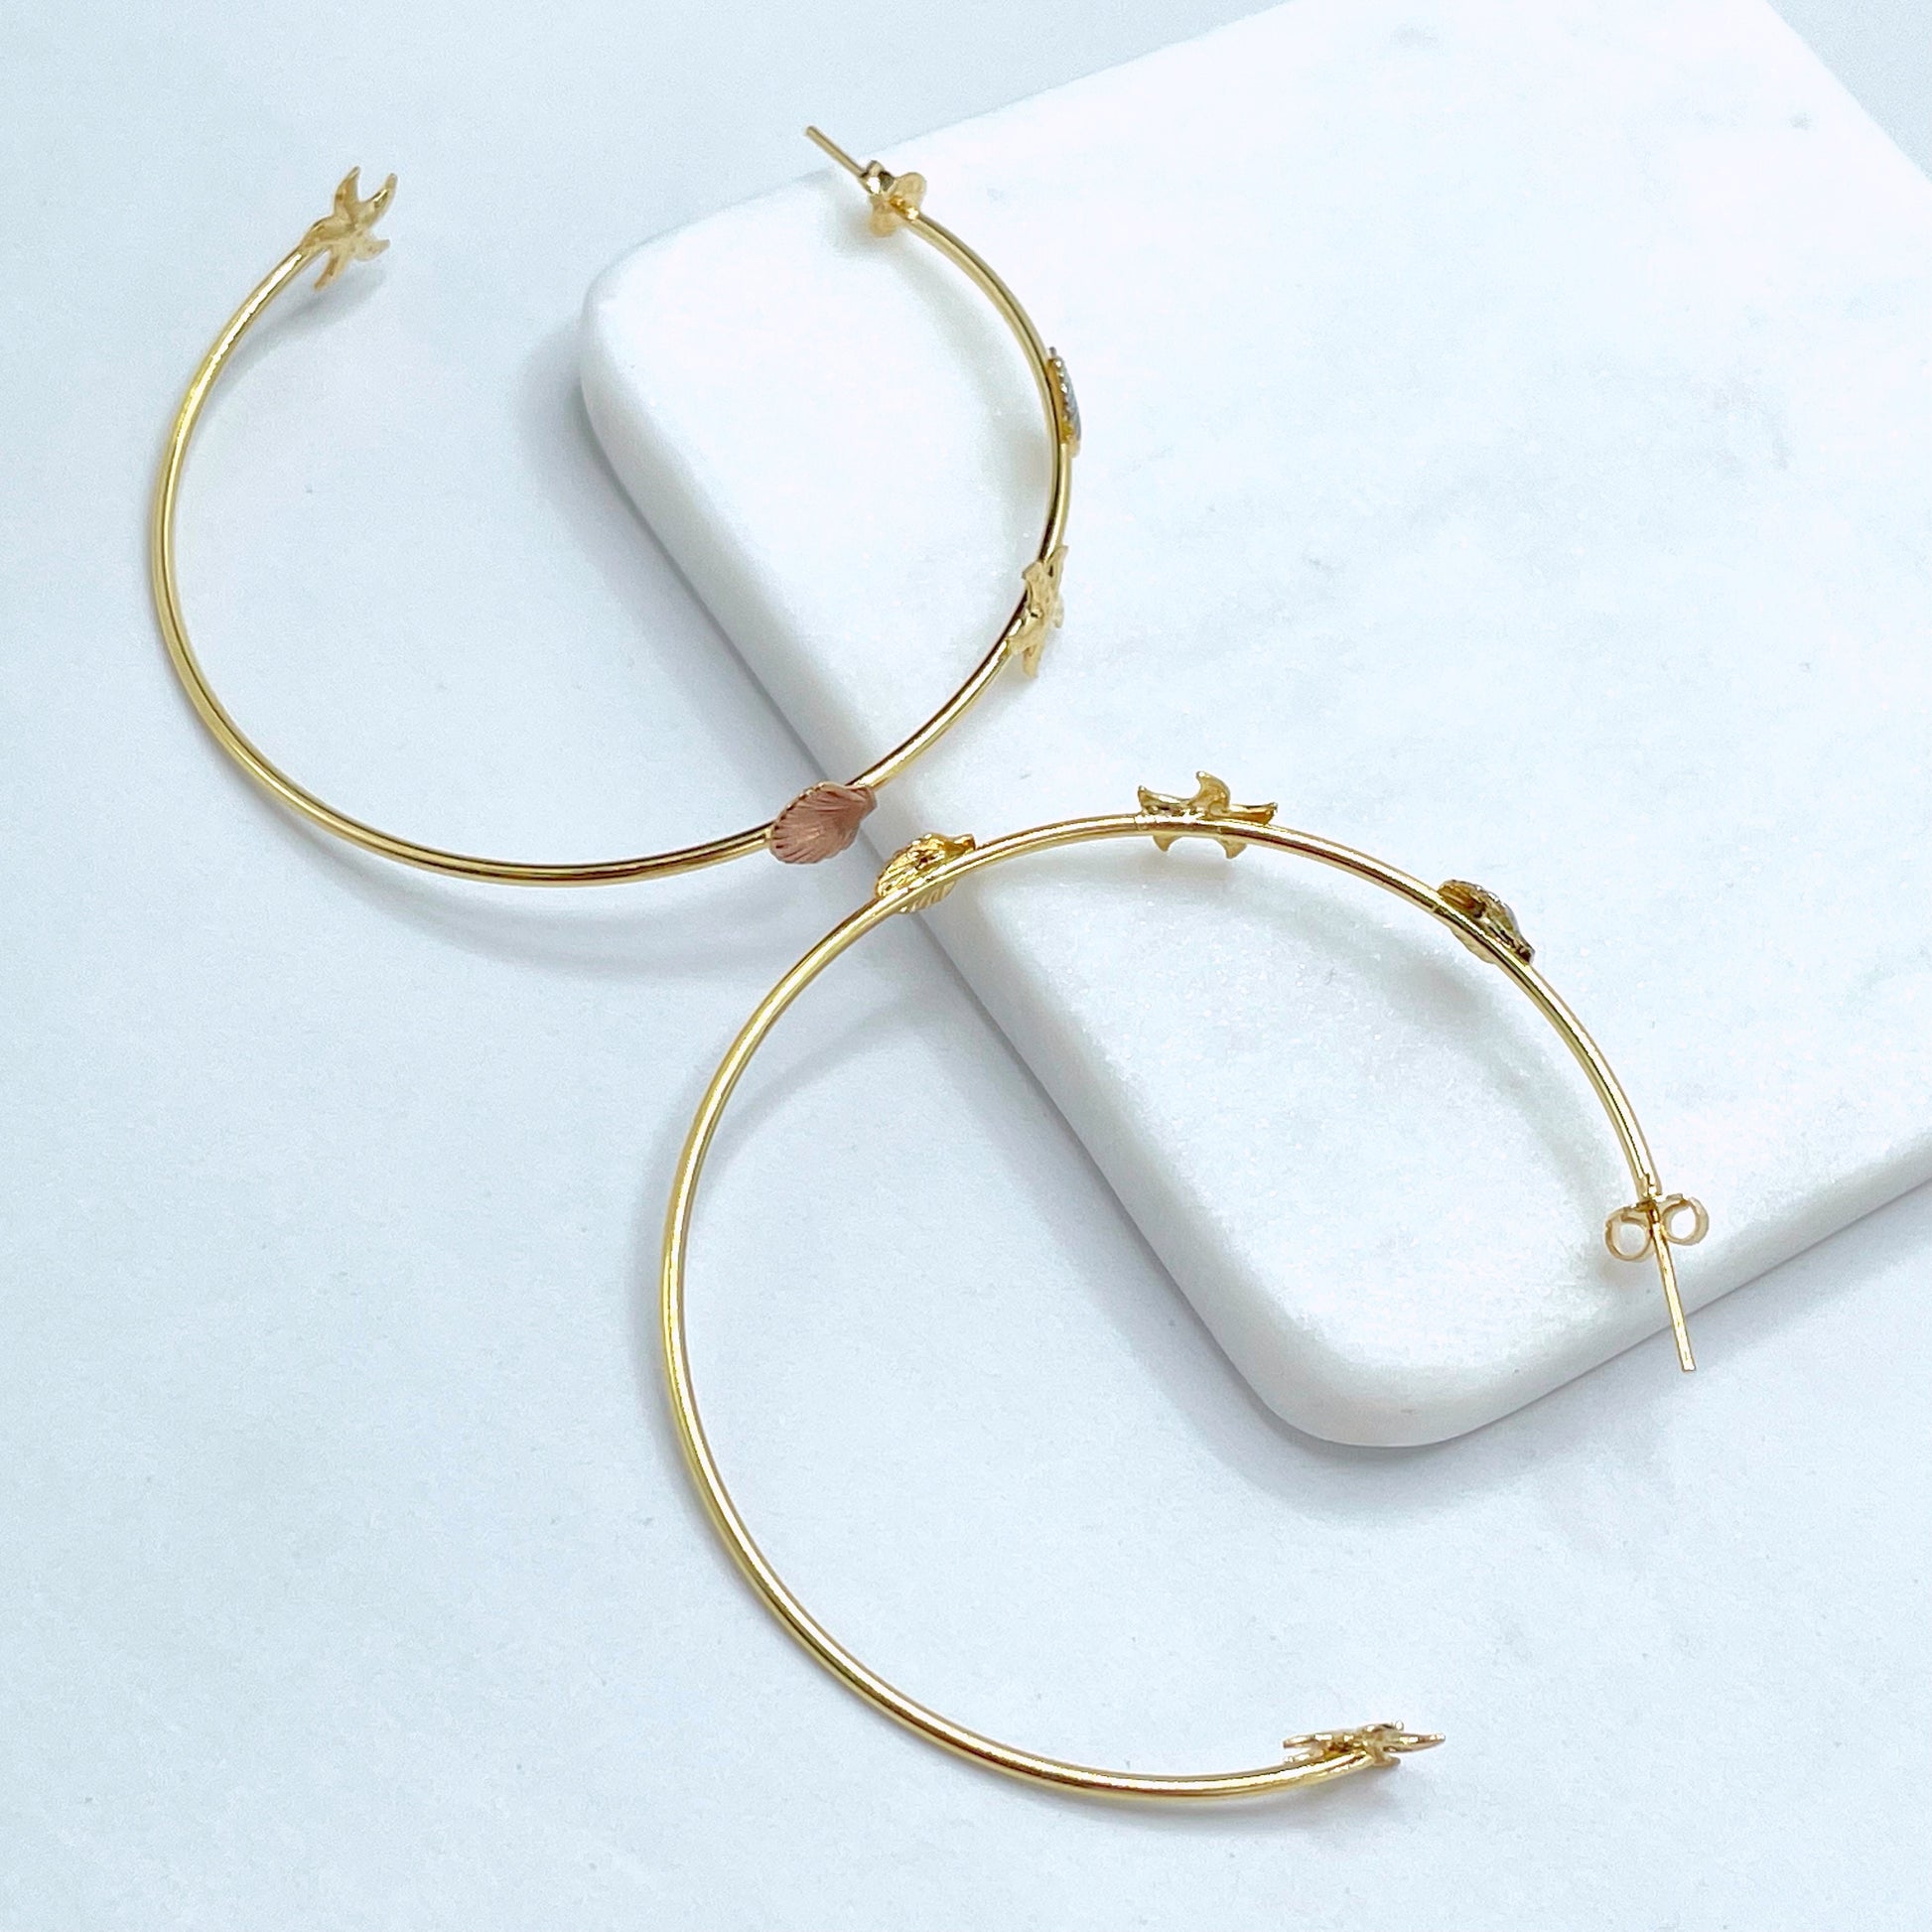 18k Gold Filled Tri Tone 62mm C-Hoops Sea Marine Theme Earrings with Shell and Starfish Charms, Wholesale Jewelry Making Supplies